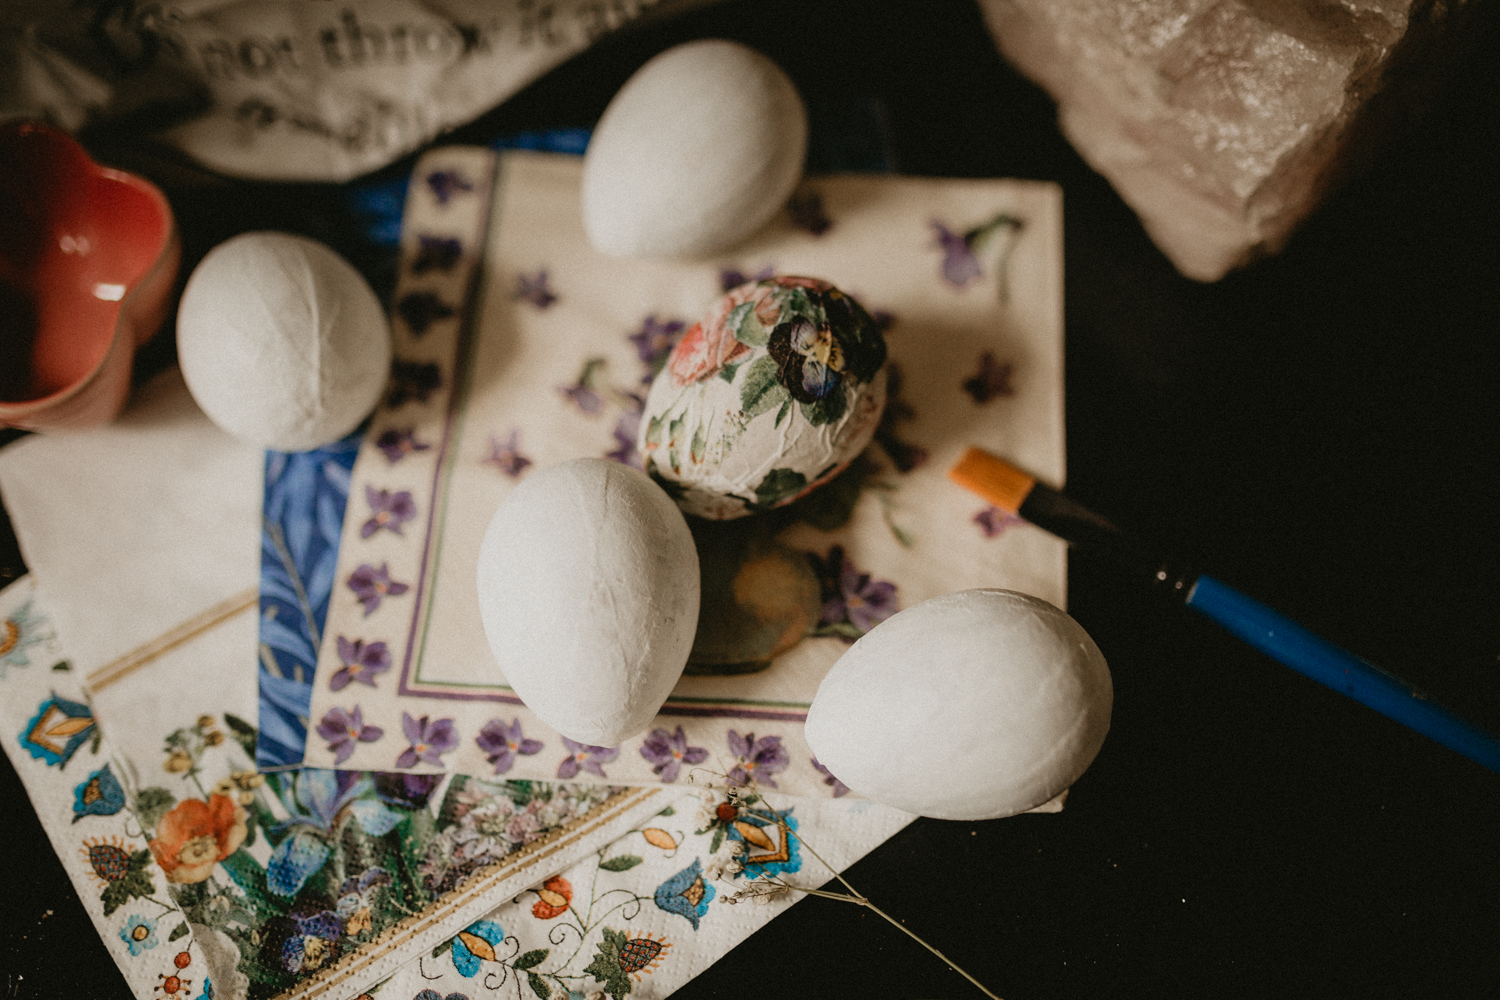 How to make an Easter egg decor